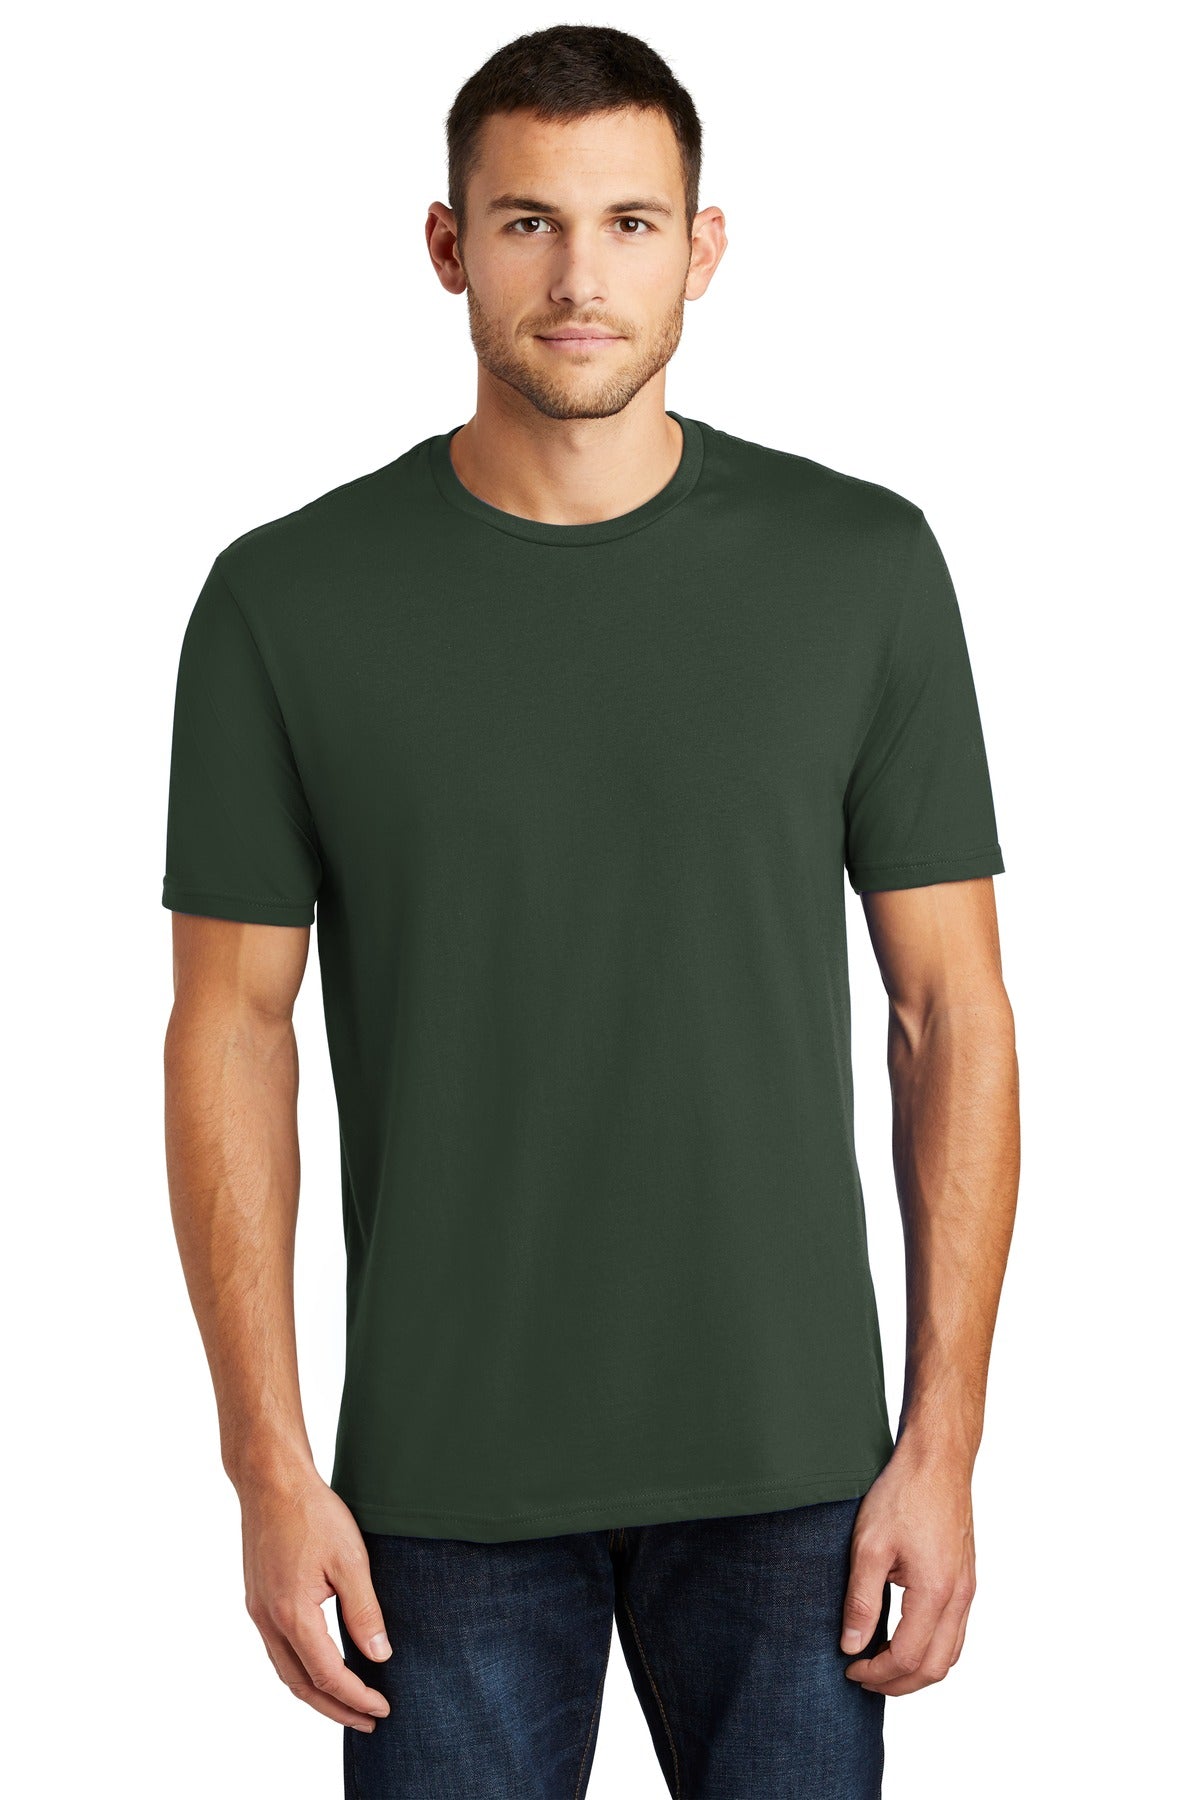 District® Perfect Weight®Tee. DT104